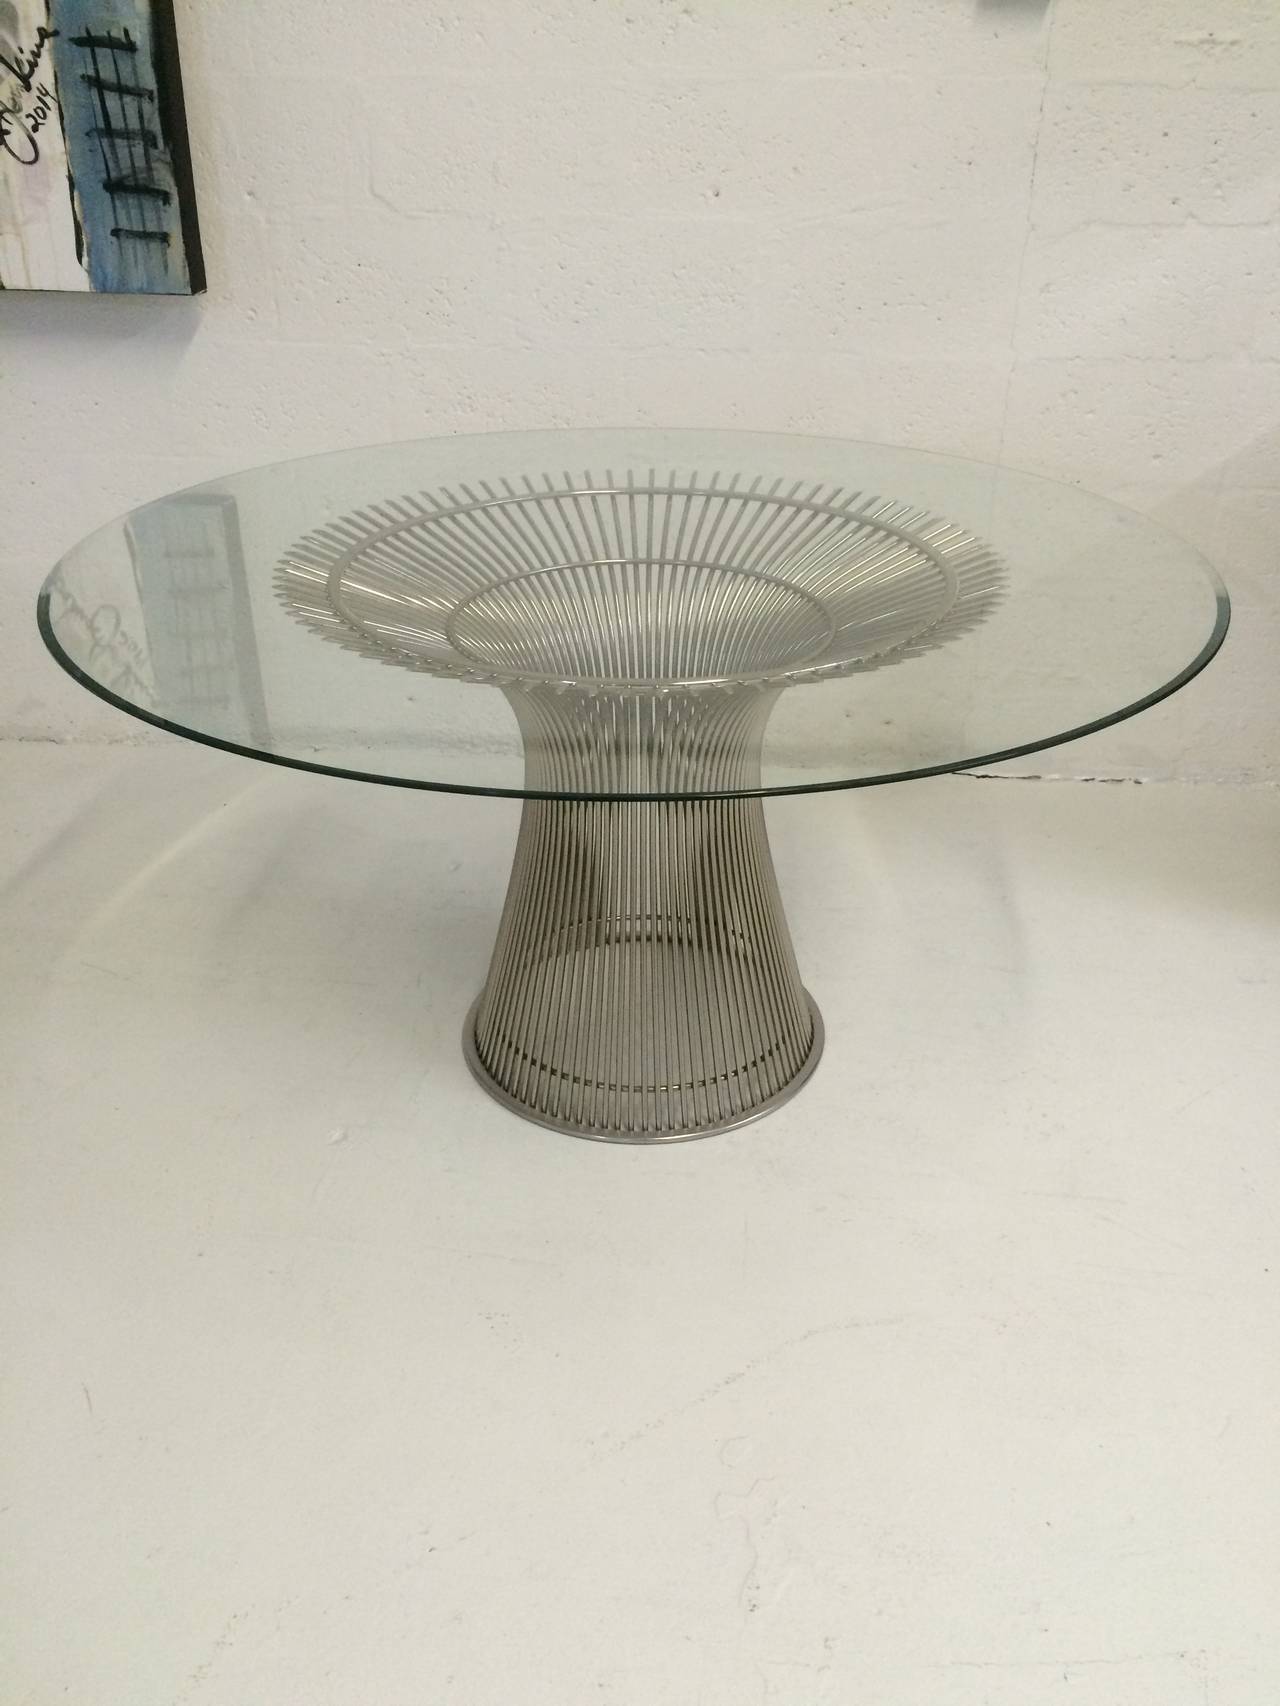 Nickel plated steel and glass dining table designed by Warren Platner for Knoll Int.